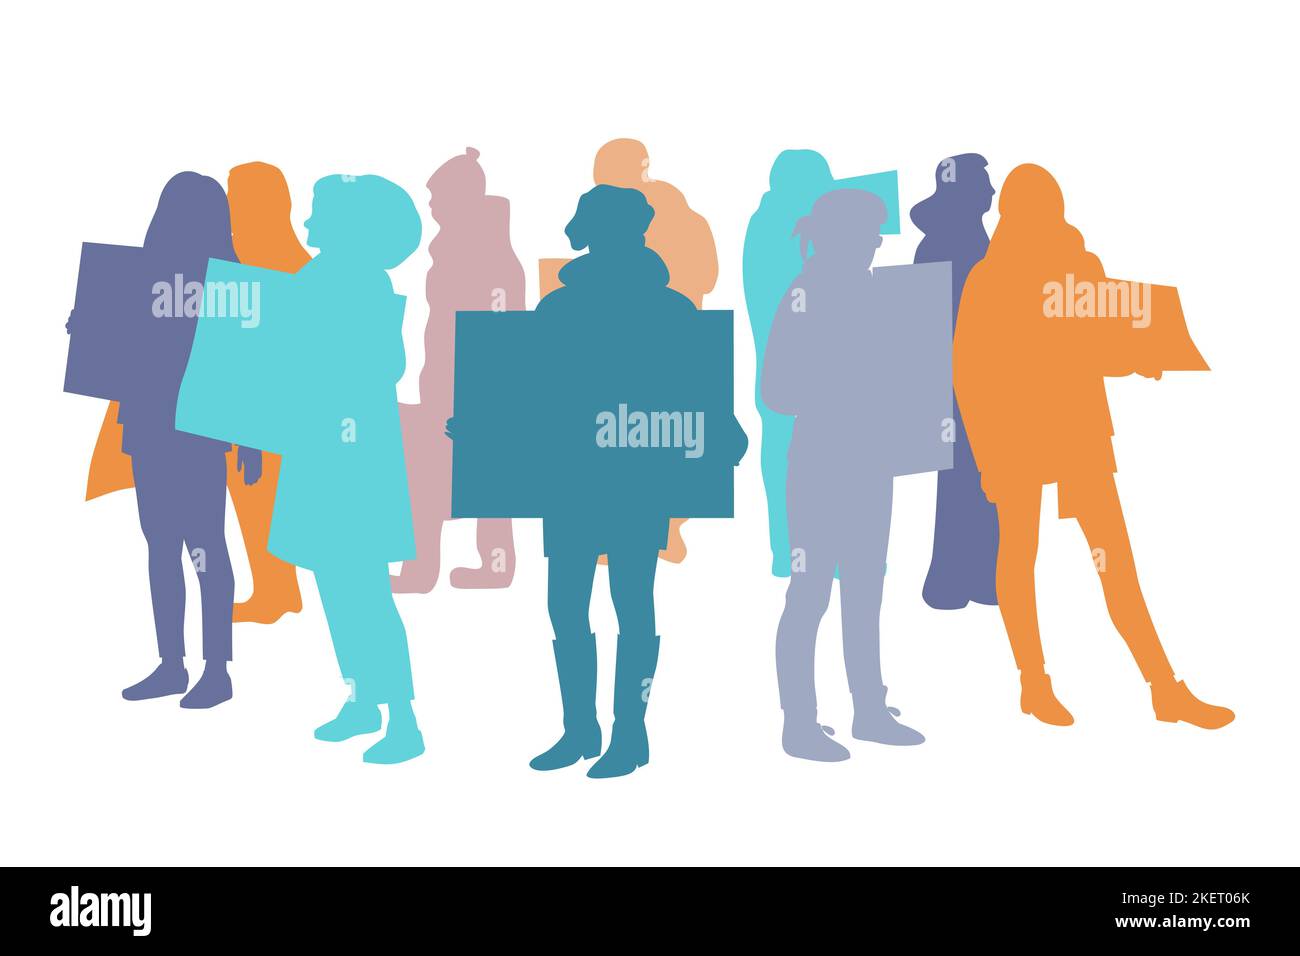 Crowd of people color silhouettes. Men and women protesters. Group of people standing together with placards. For any type of protest. Flat vector illustration. Stock Vector